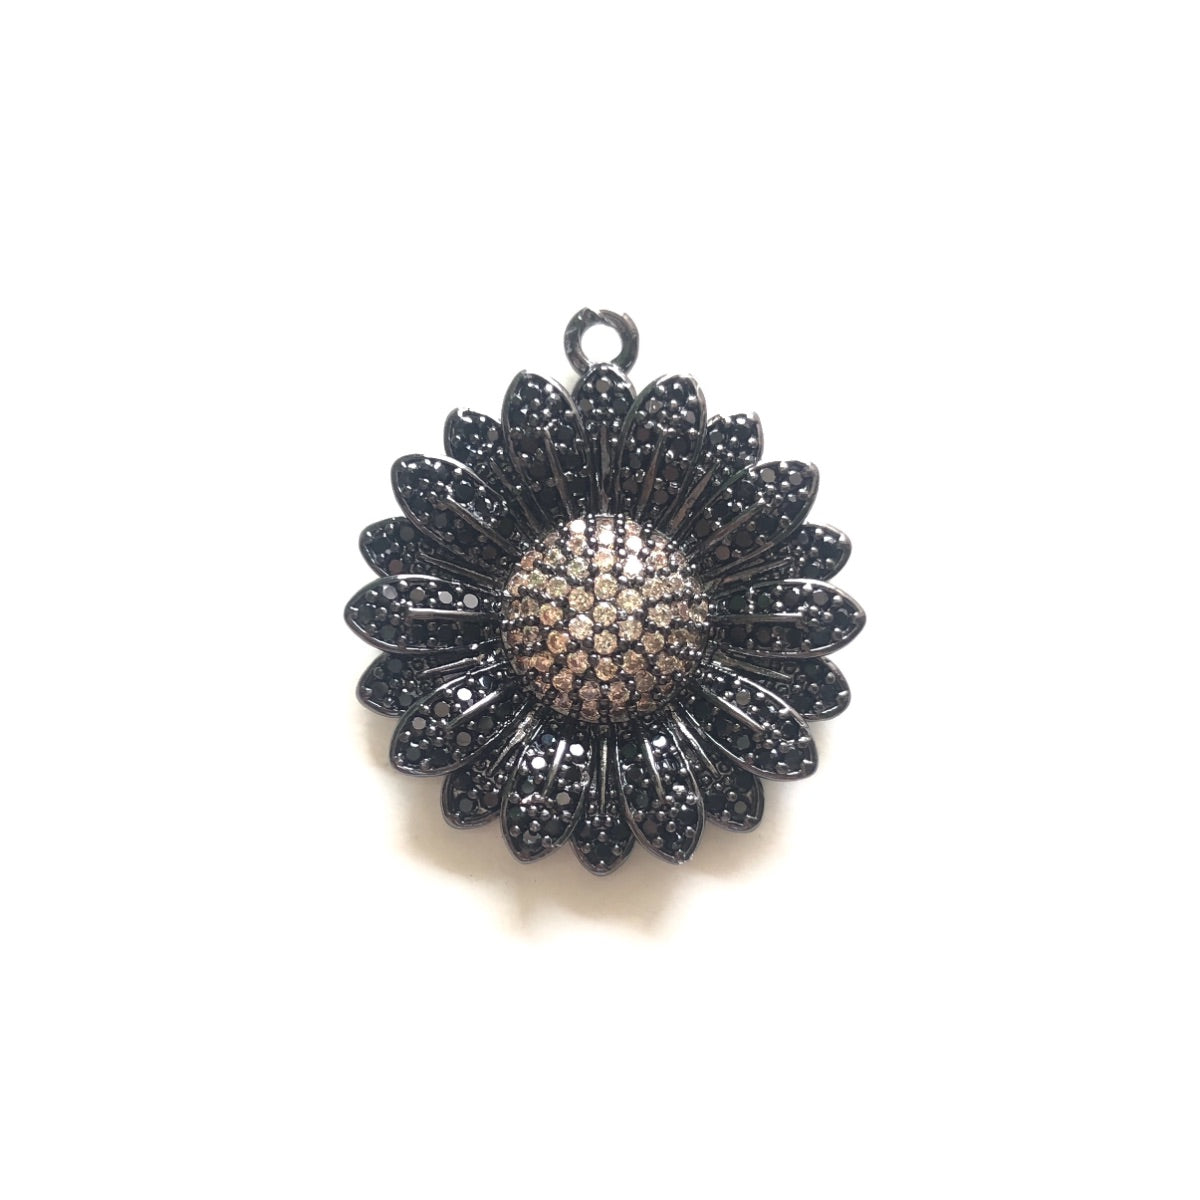 5-10pcs/lot 28.5*26mm Clear/Black + Champagne CZ Paved Sunflower Charms Black+Champagne on Black CZ Paved Charms Flowers Charms Beads Beyond